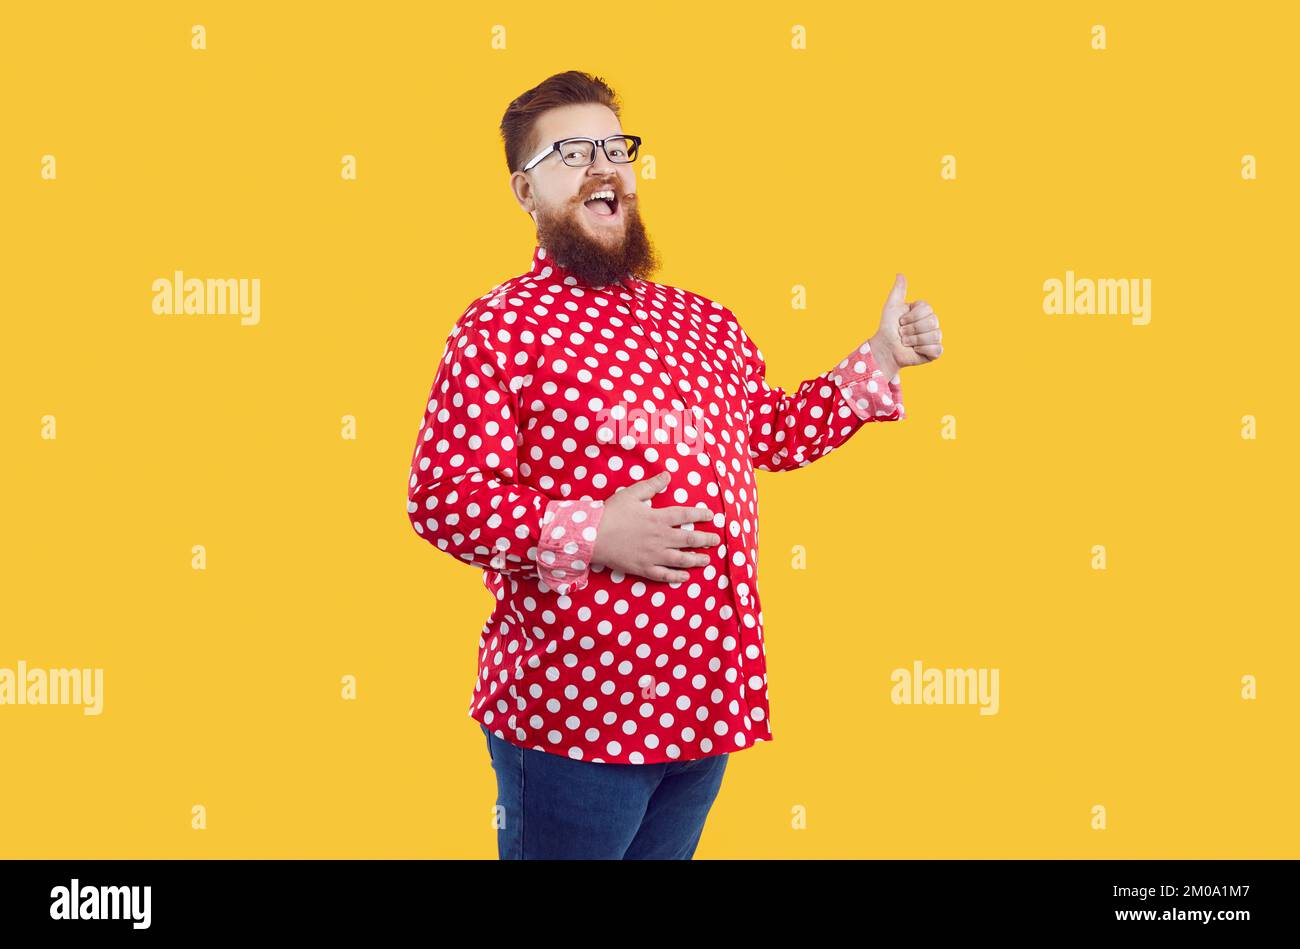 Funny cheerful fat man isolated on yellow background smiling and showing thumbs up Stock Photo